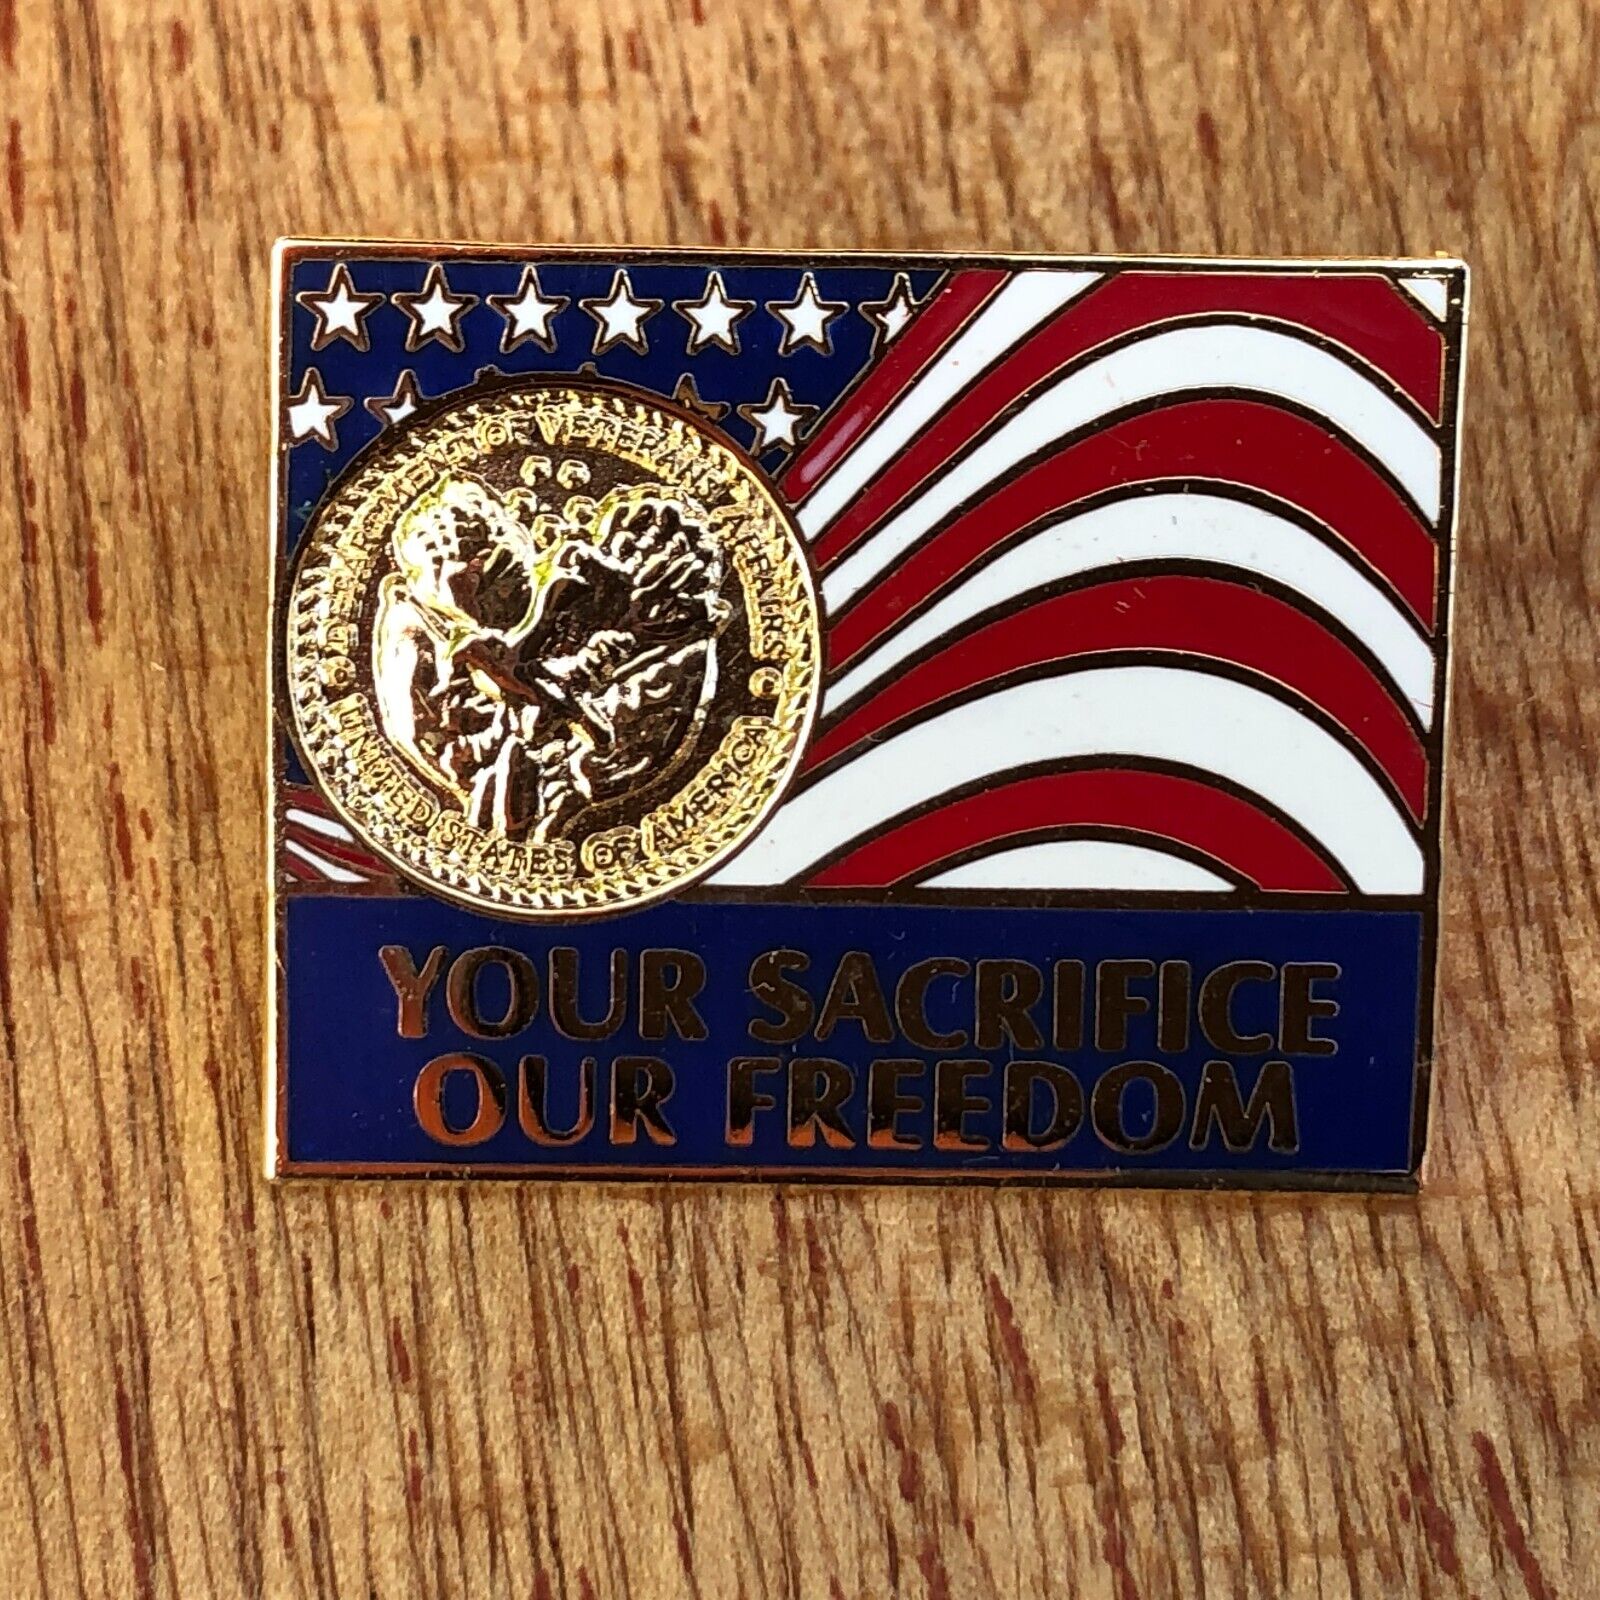 Your Service Our Freedom Veterans Lapel Hat Pin Stars + Stripes Patriotic Q7